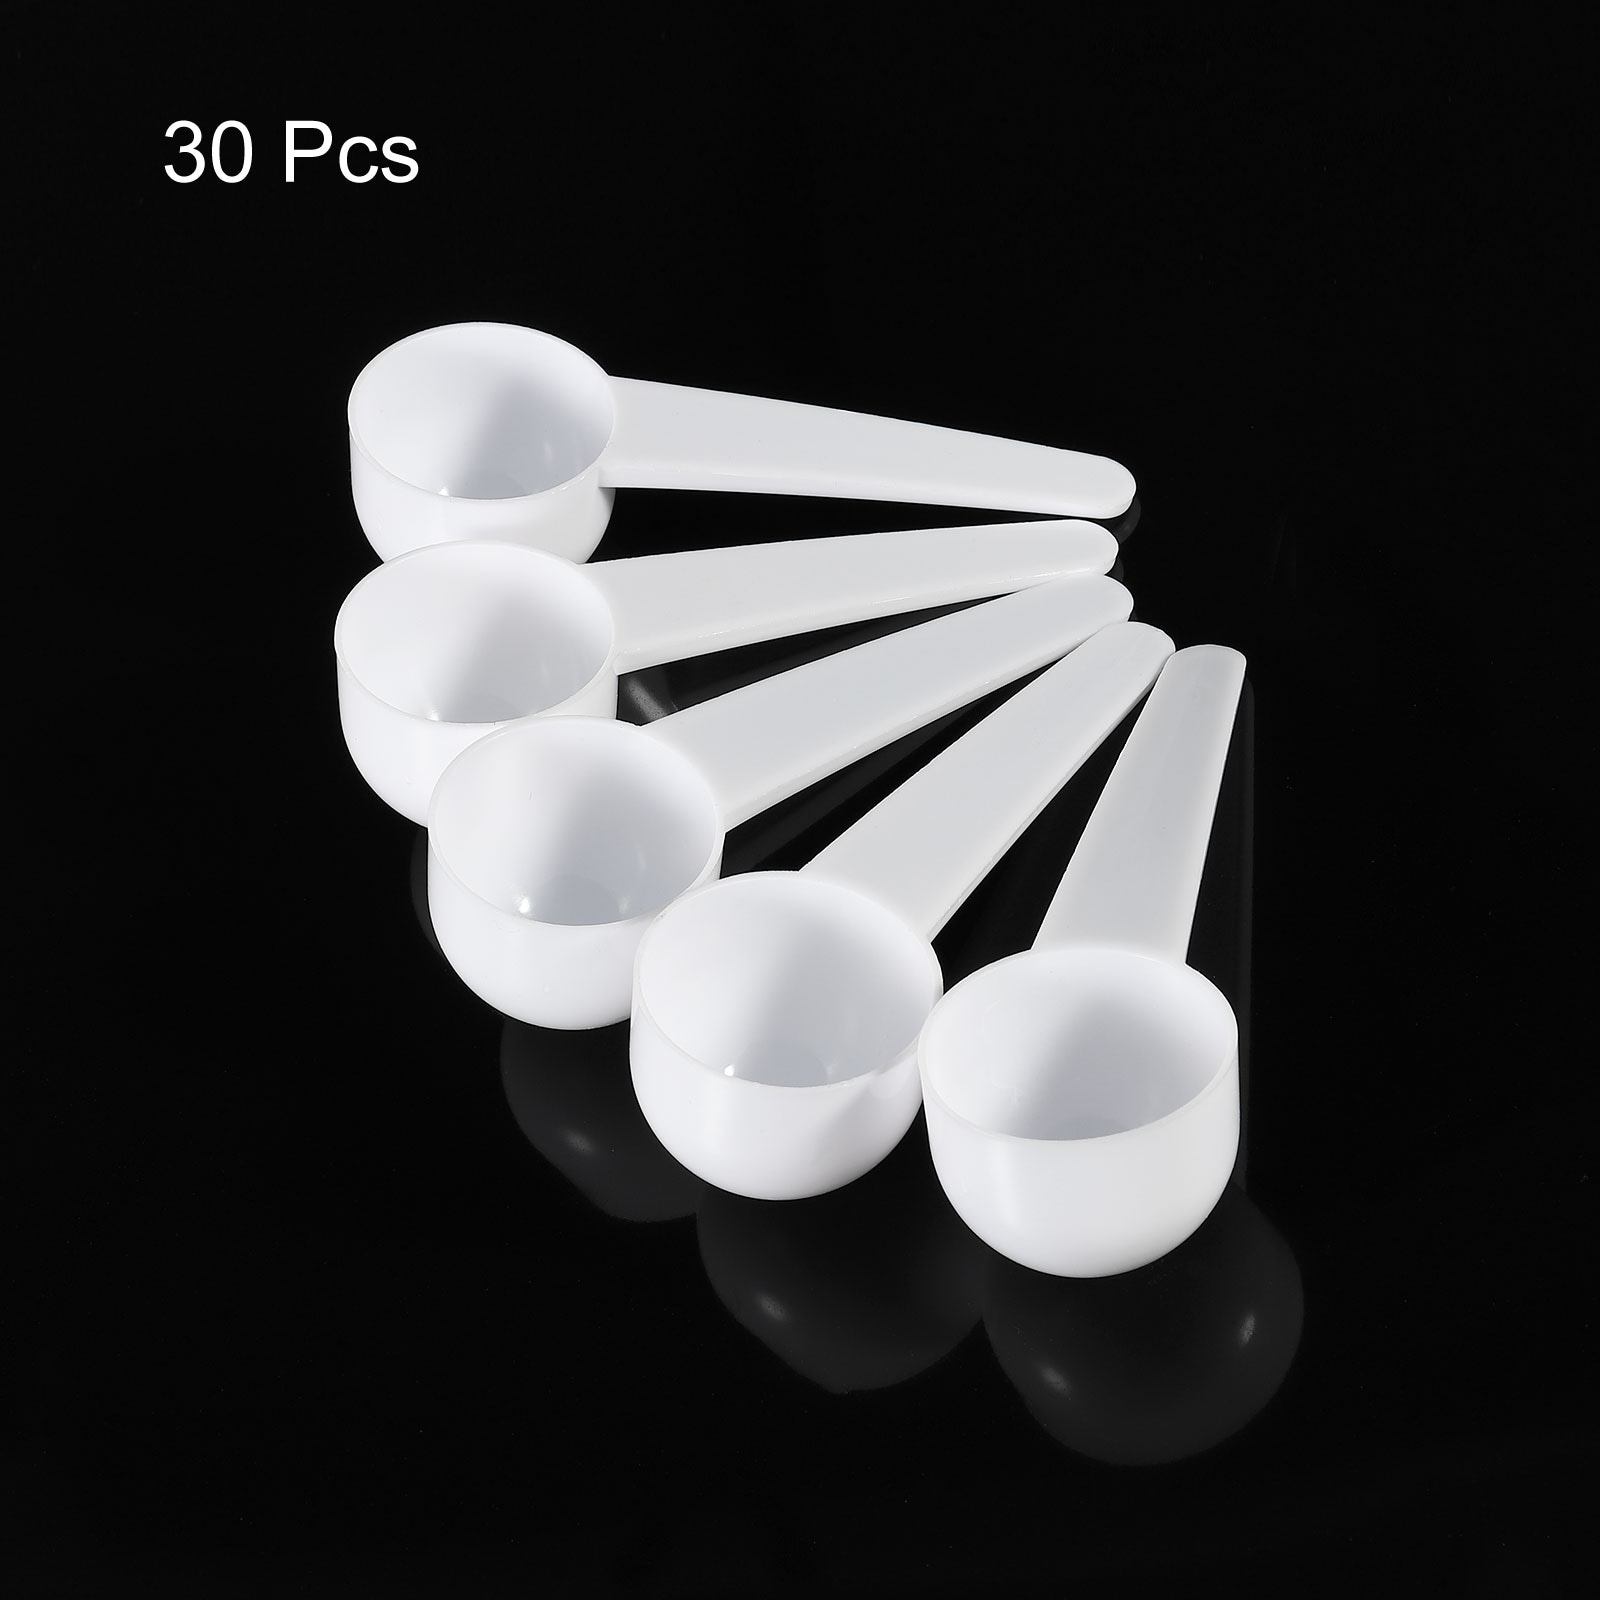 https://ak1.ostkcdn.com/images/products/is/images/direct/880ea29946647c802561191ca23d254623a12699/Micro-Spoons-10-Gram-Measuring-Scoop-Plastic-Round-Bottom-Mini-Spoon-30Pcs.jpg